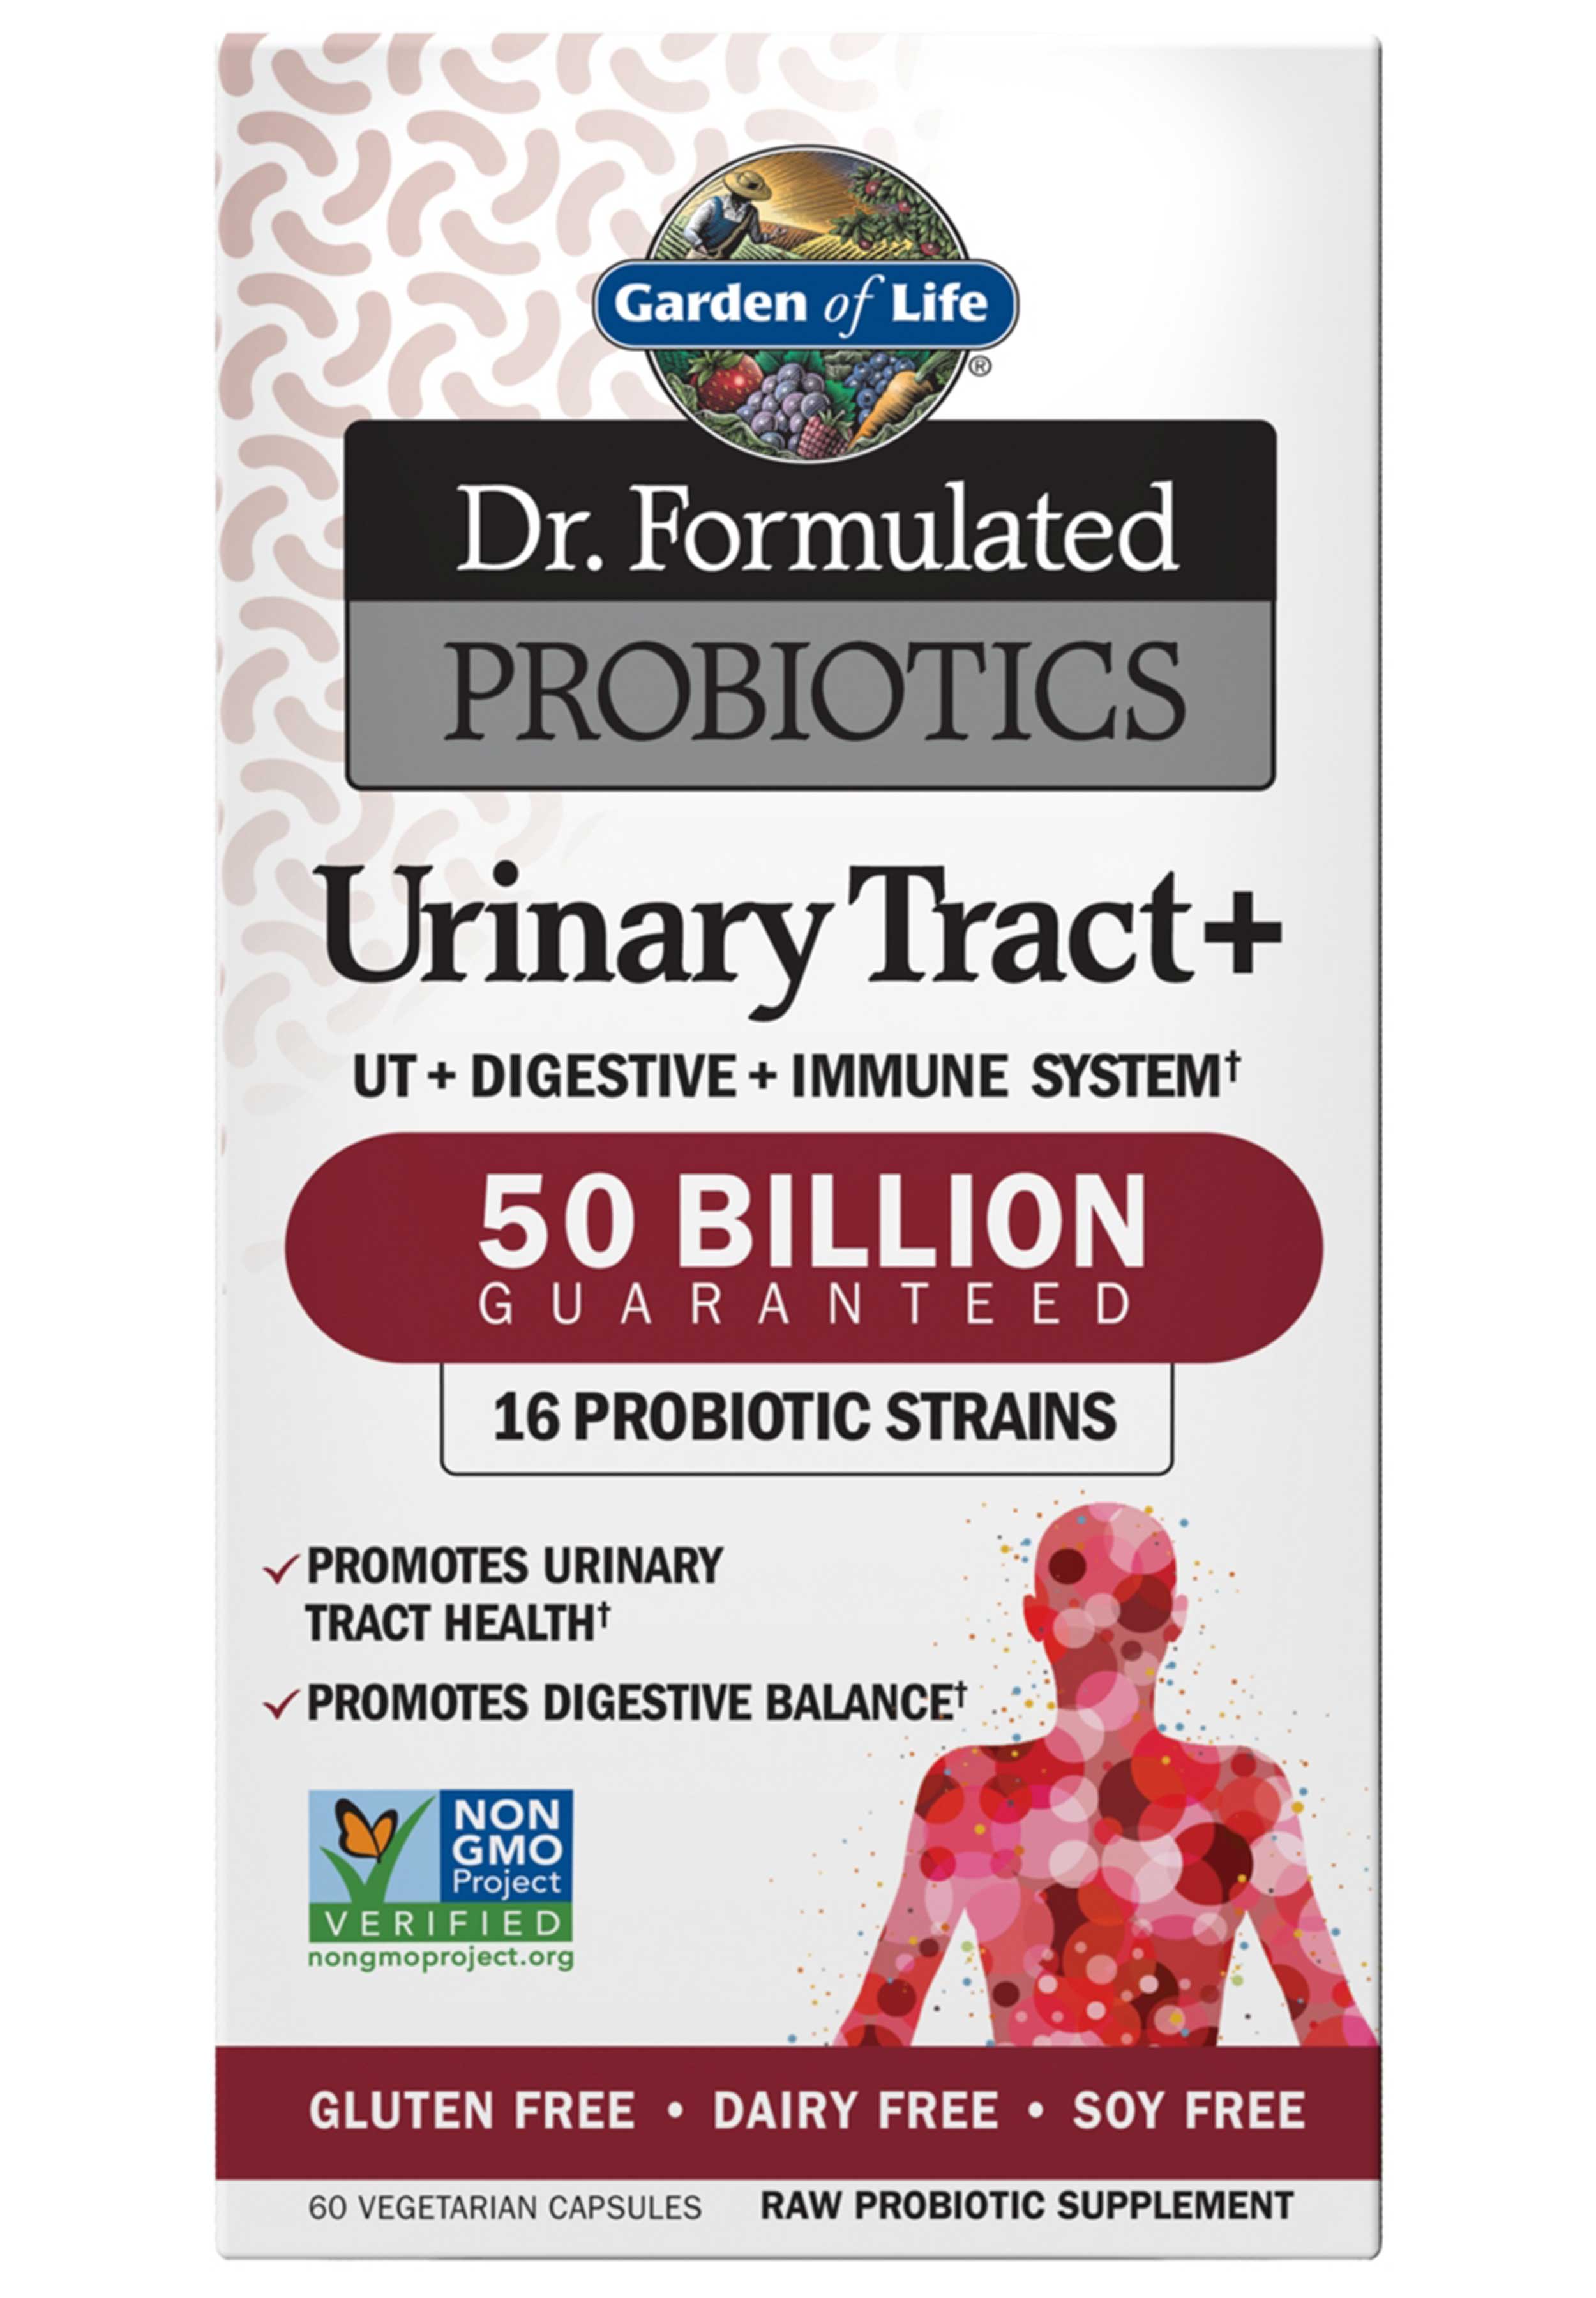 Garden of Life Dr. Formulated Probiotics Urinary Tract+